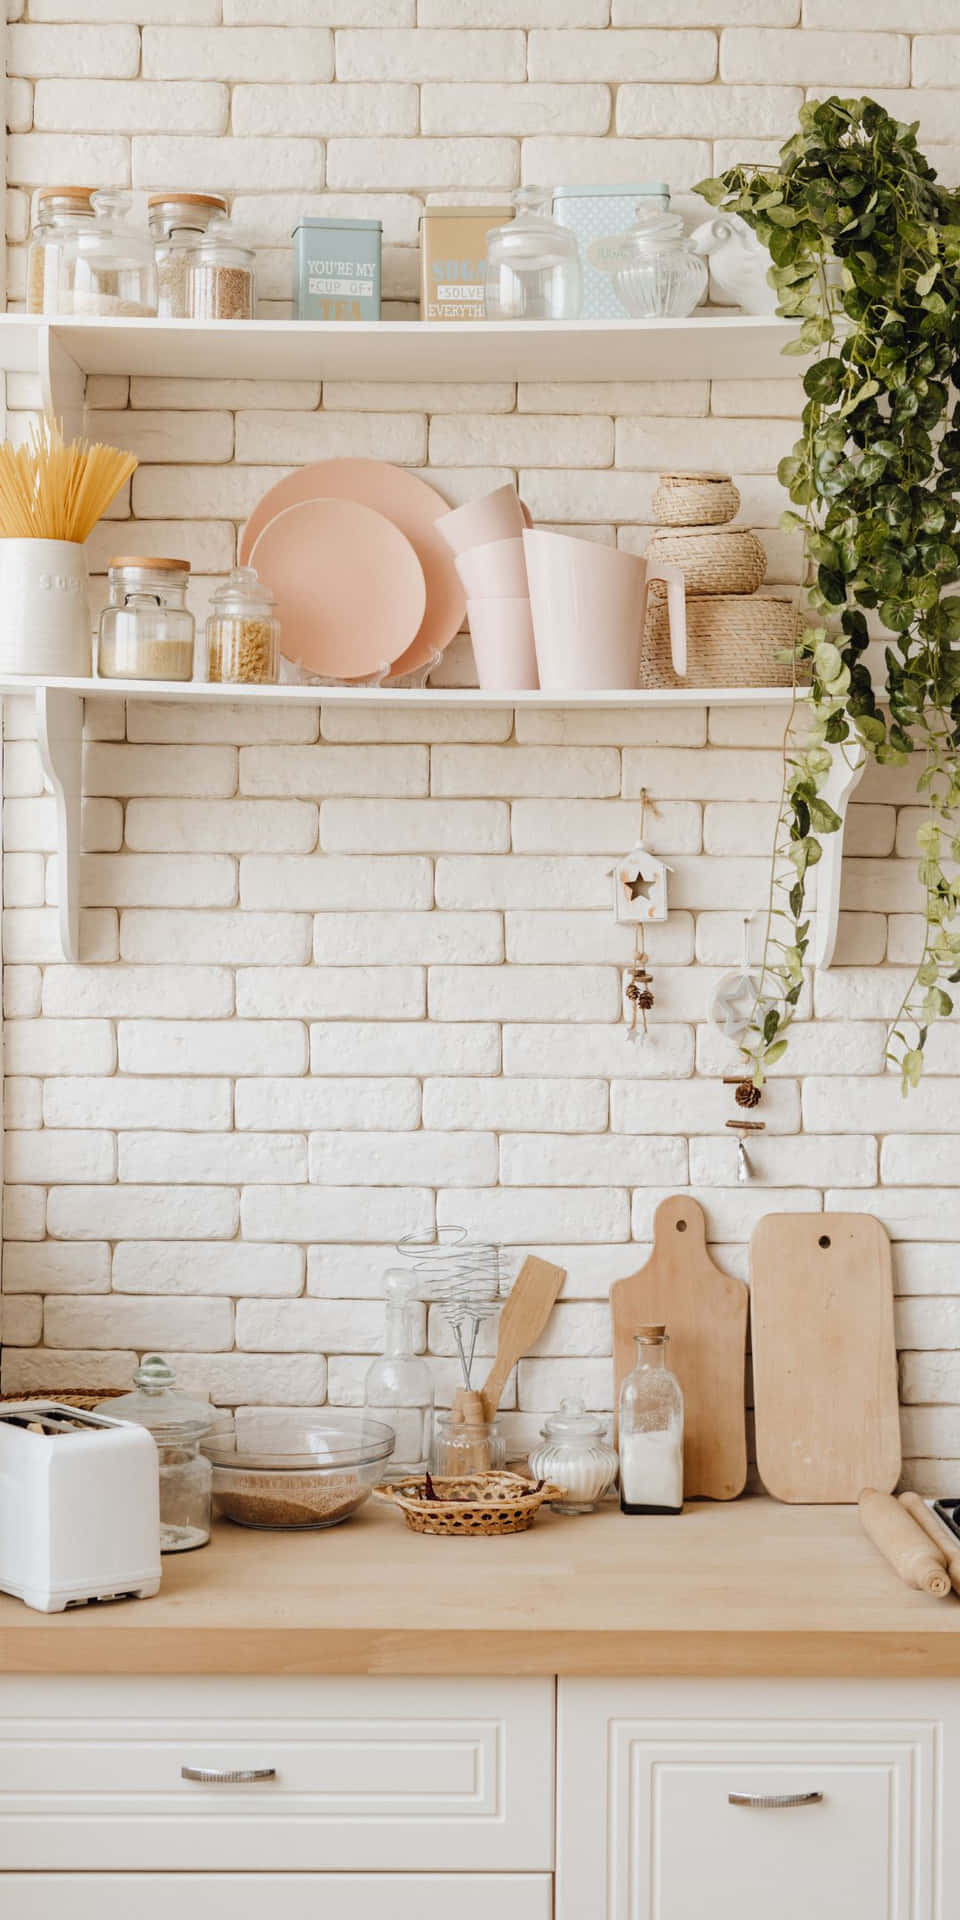 A Kitchen With A White Brick Wall And Shelves